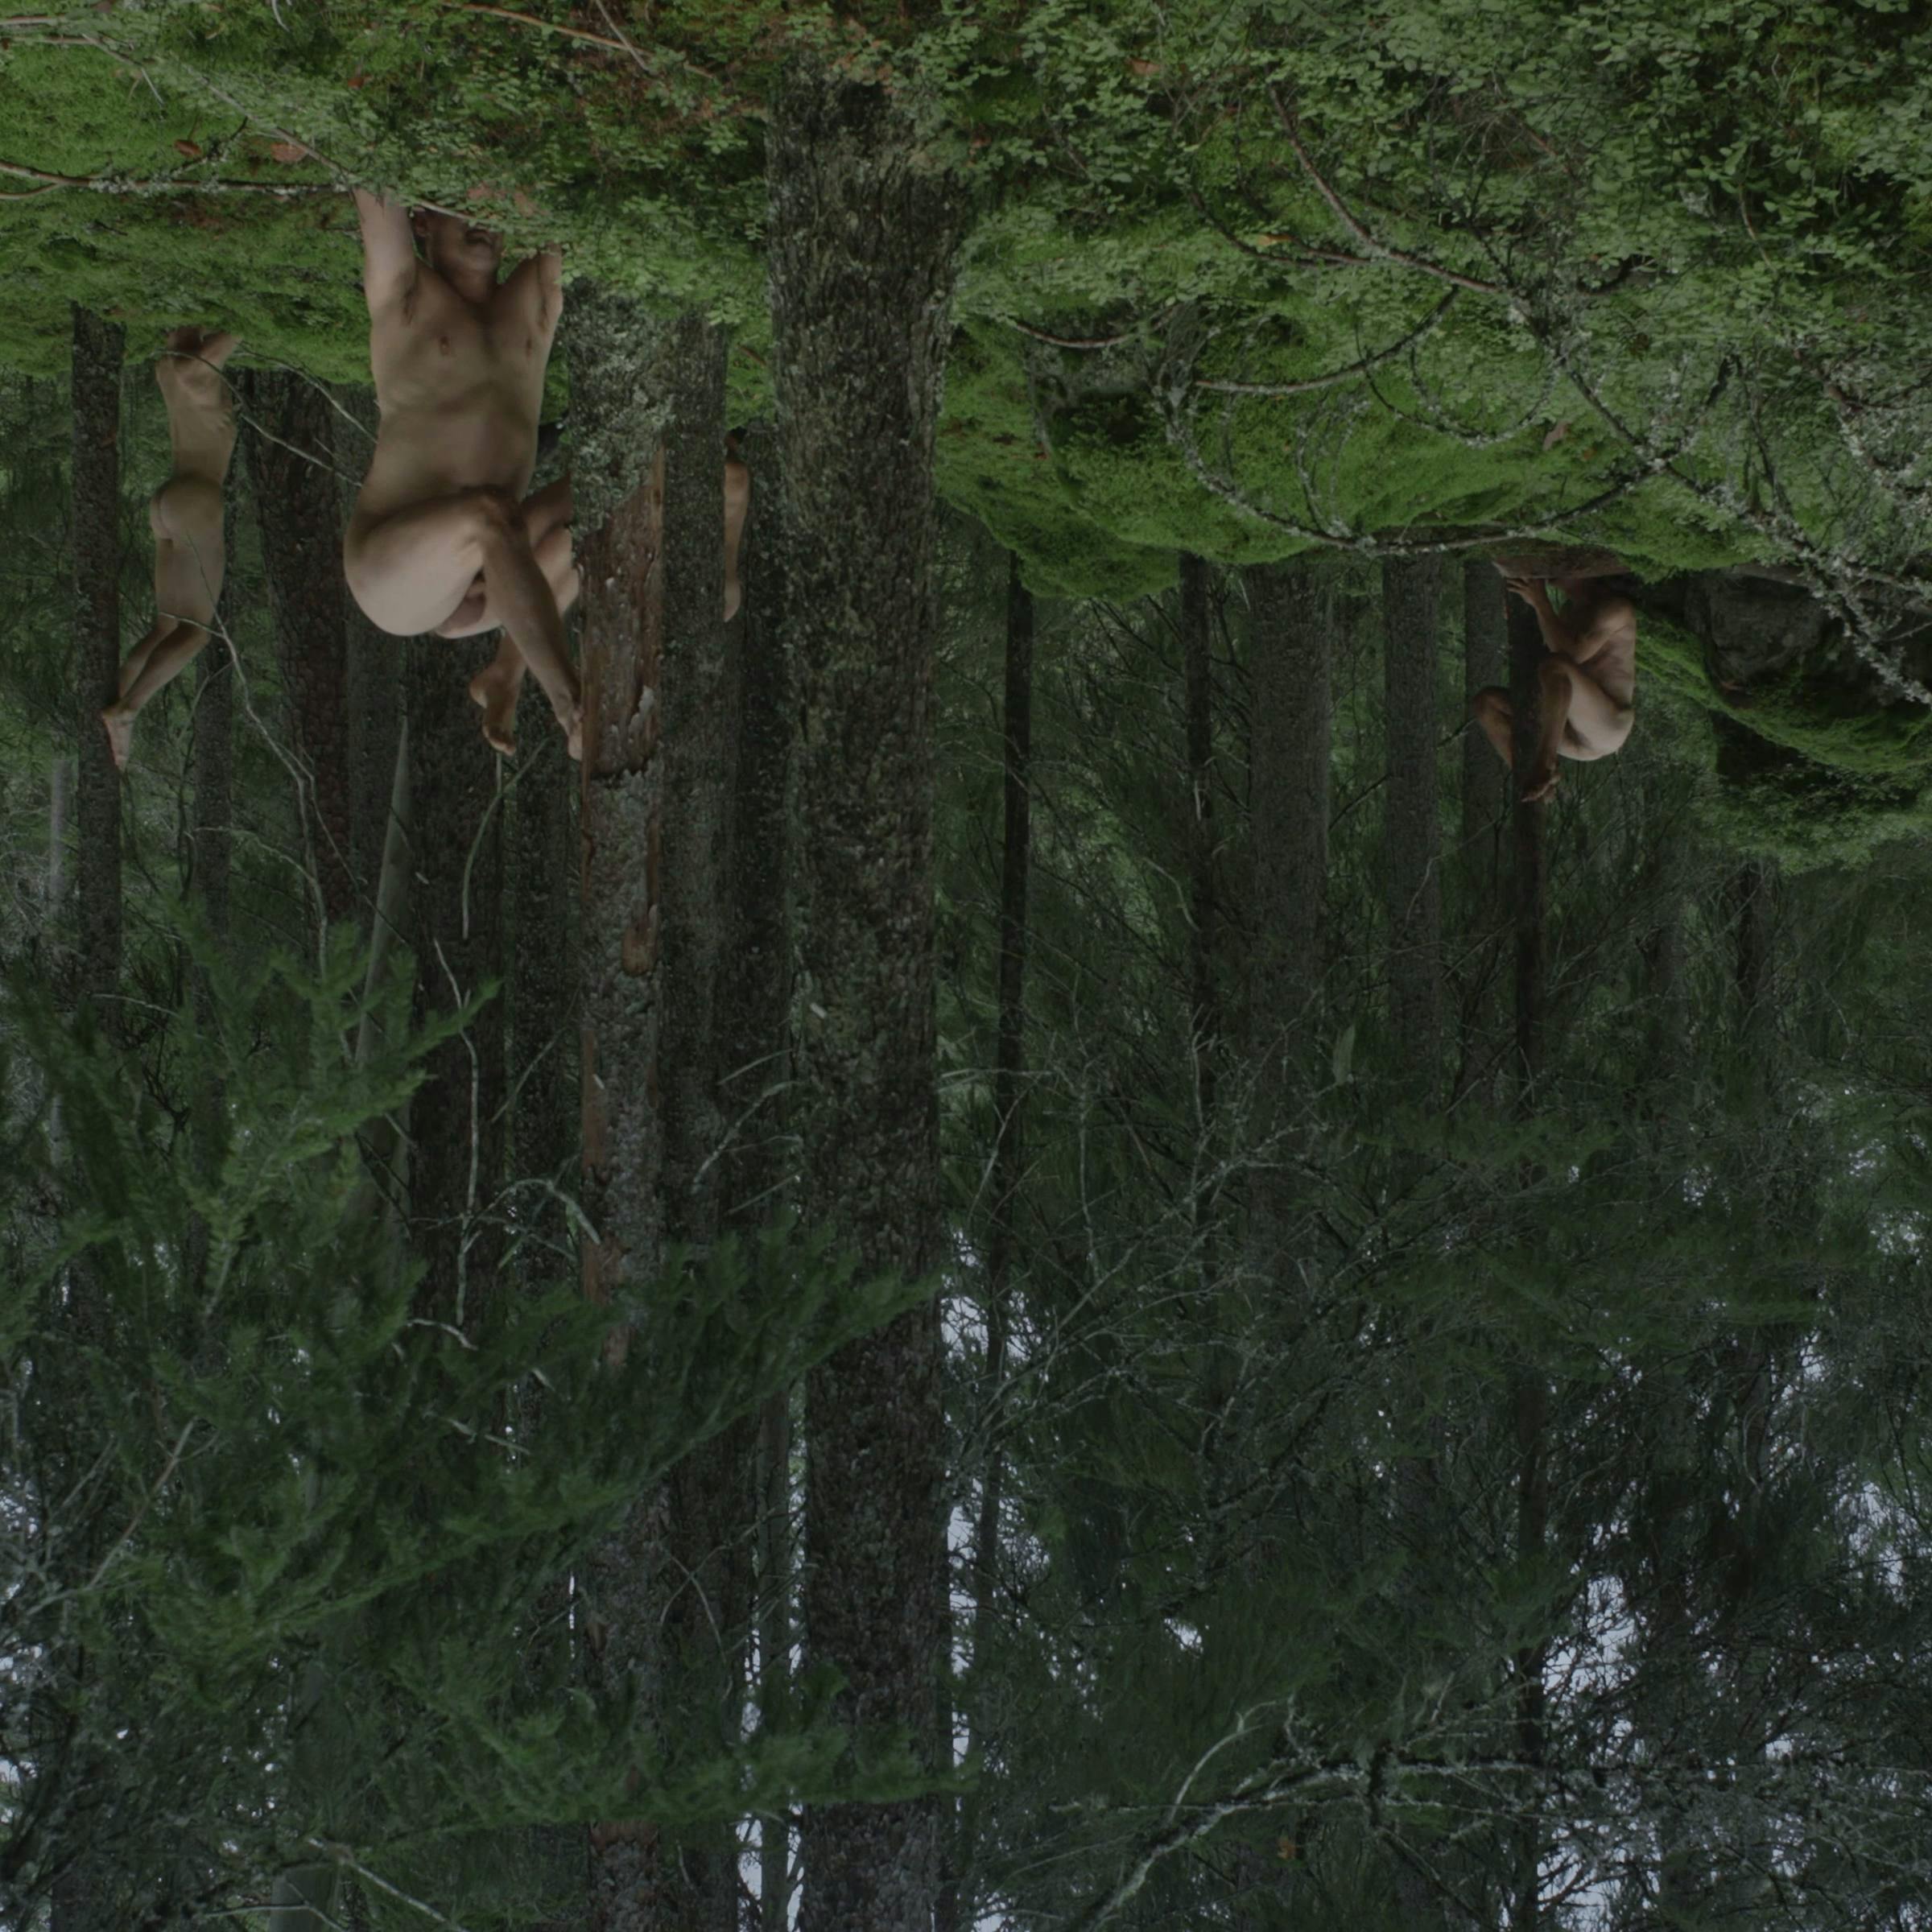 an upside down image of a lush forest. We can see four naked person in the distance